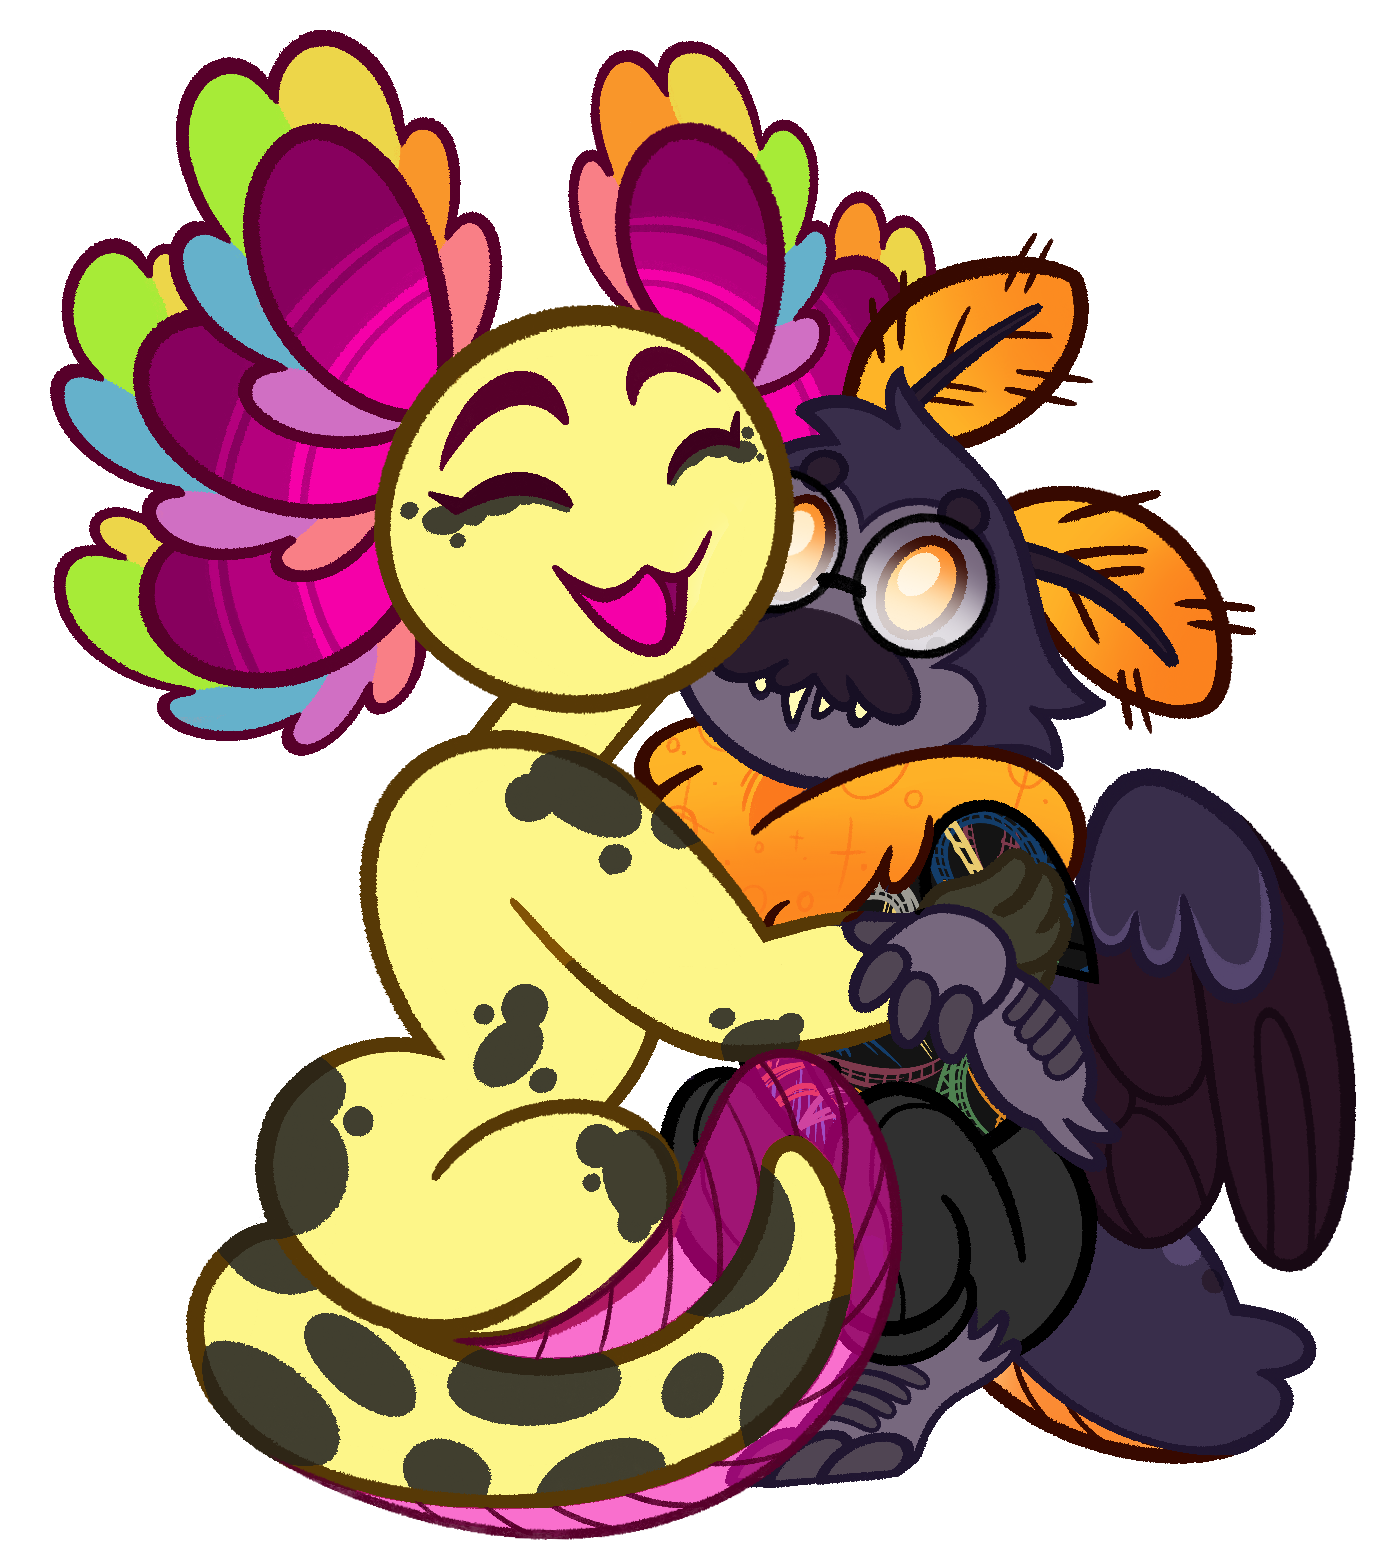 An illustration of Casper, a purple mothman, being hugged by Lemon, a pastel yellow axolotl with pink and rainbow accents. Casper looks confused while Lemon is giving an open-mouthed smile.